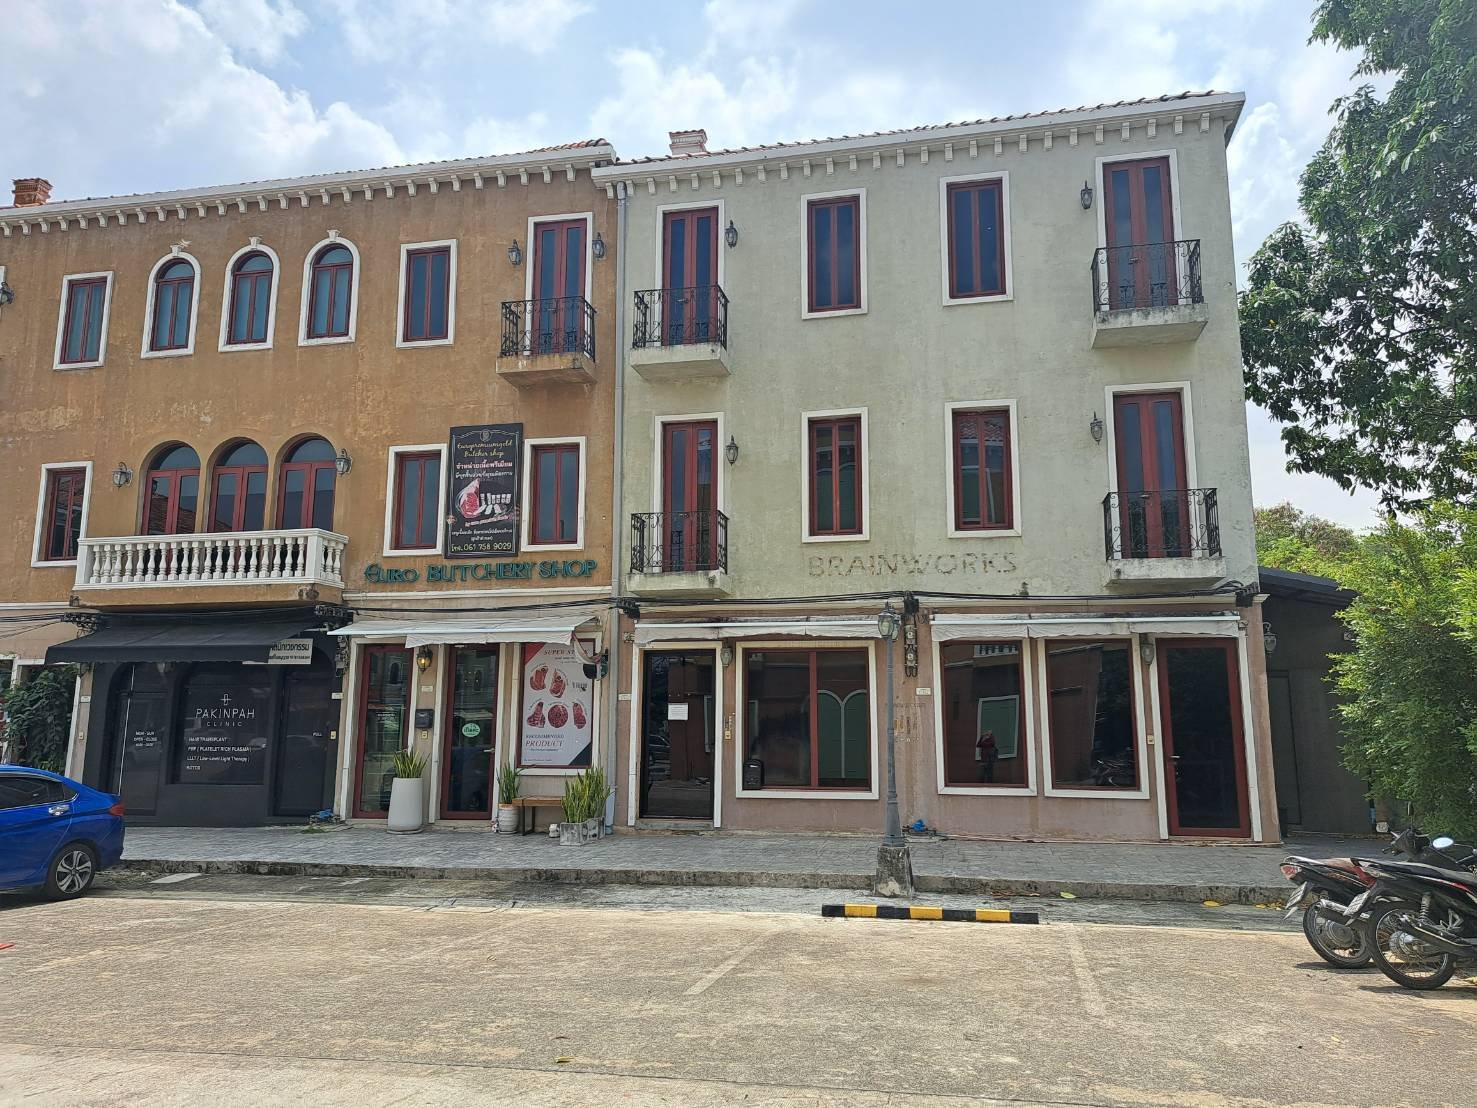 Business location in Watcharapol area!! Office building for sale, commercial building, 2 units, behind the corner, 3 floors, 50.8 sq m. Venice Di Iris Watcharapon Project, Urgent Sale